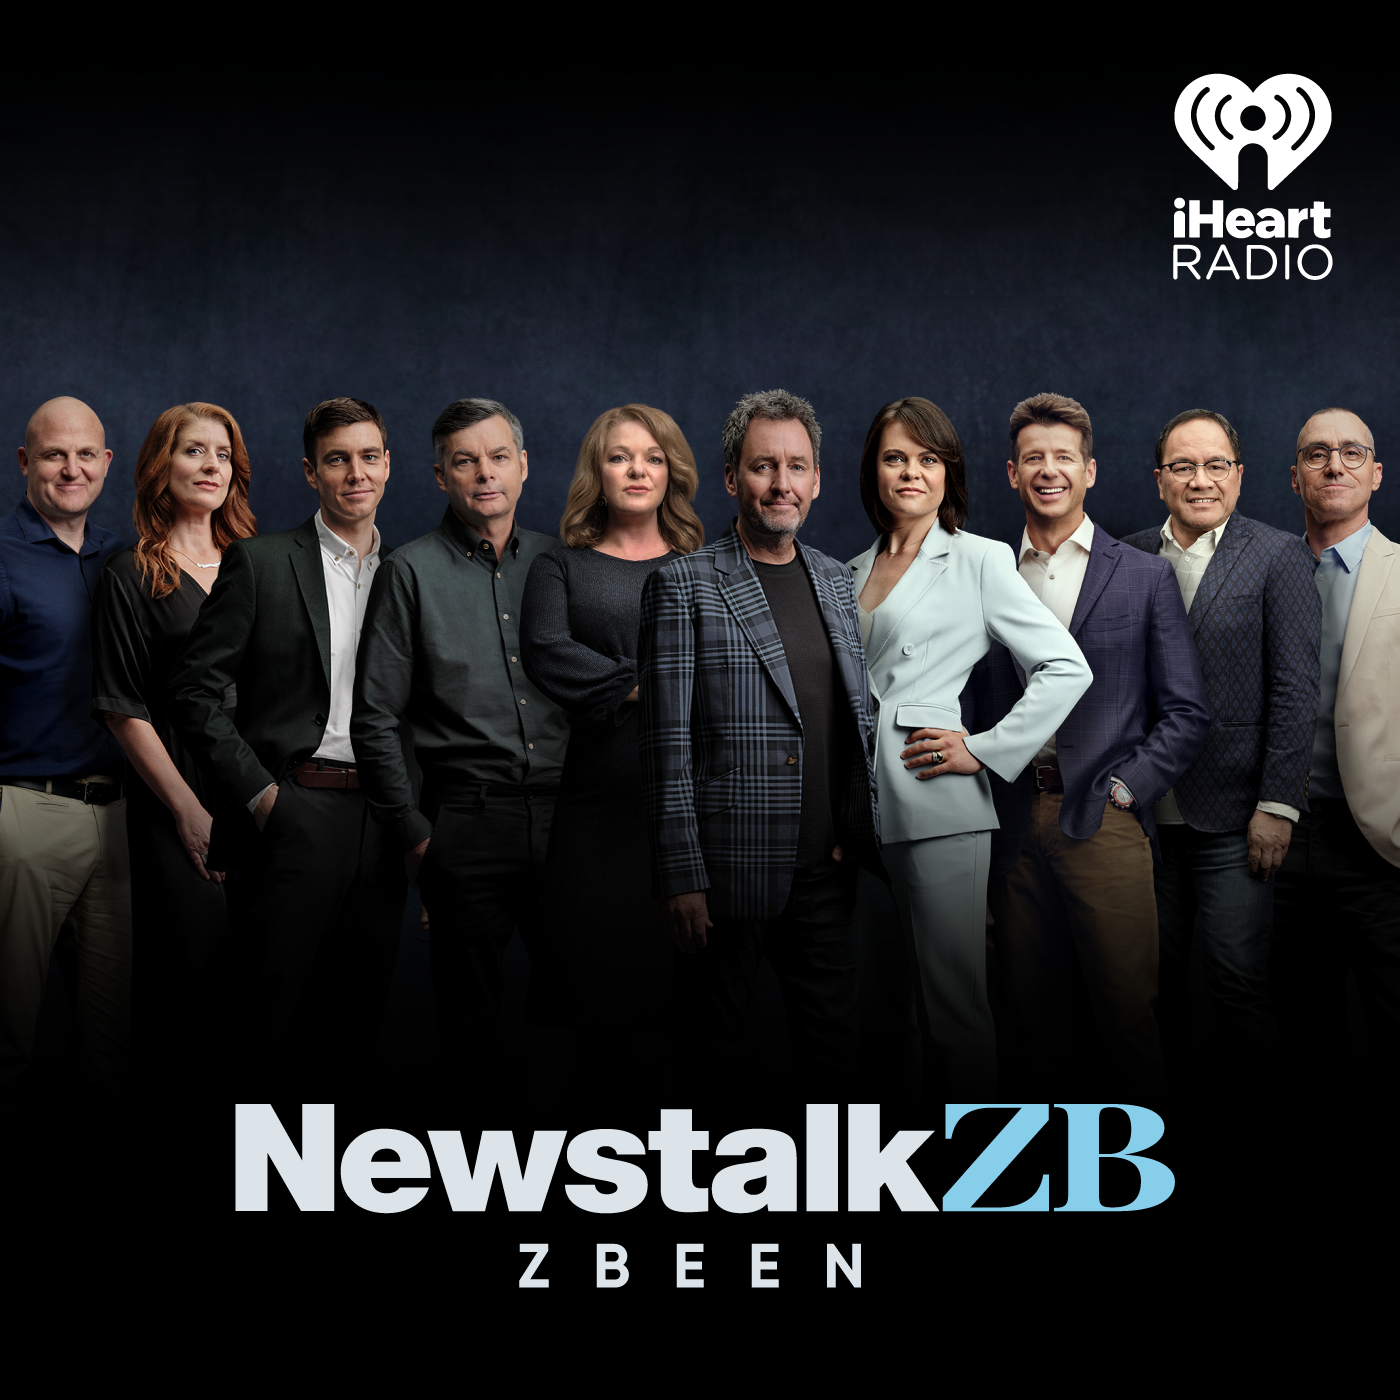 NEWSTALK ZBEEN: Another Relic of the Past Revived